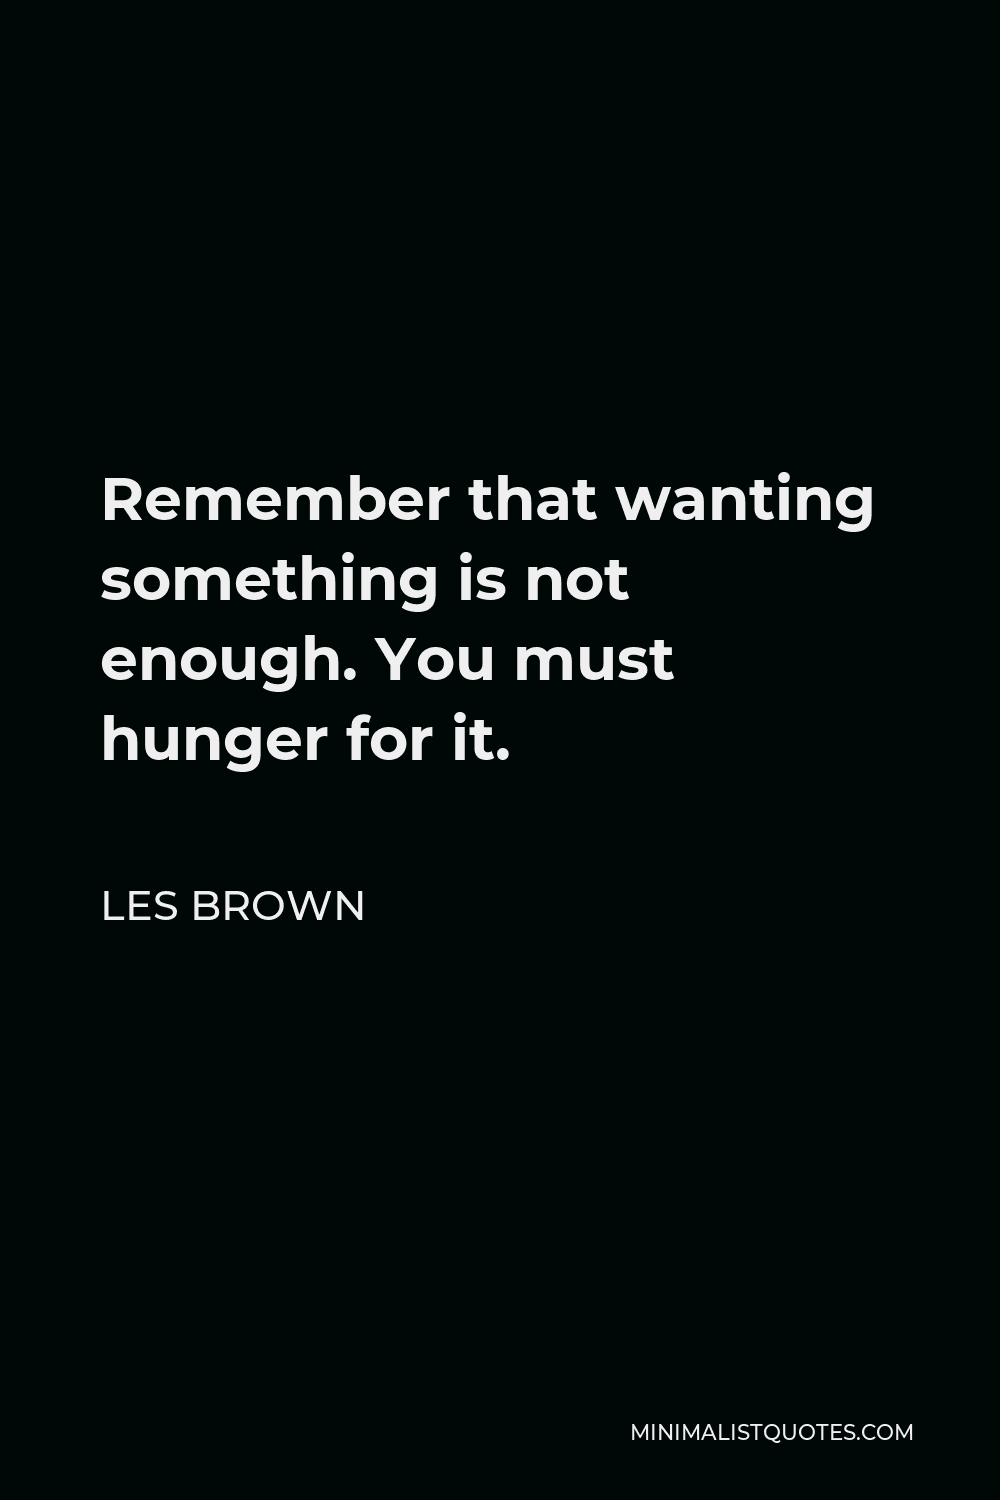 Les Brown Quote - Remember that wanting something is not enough. You must hunger for it.